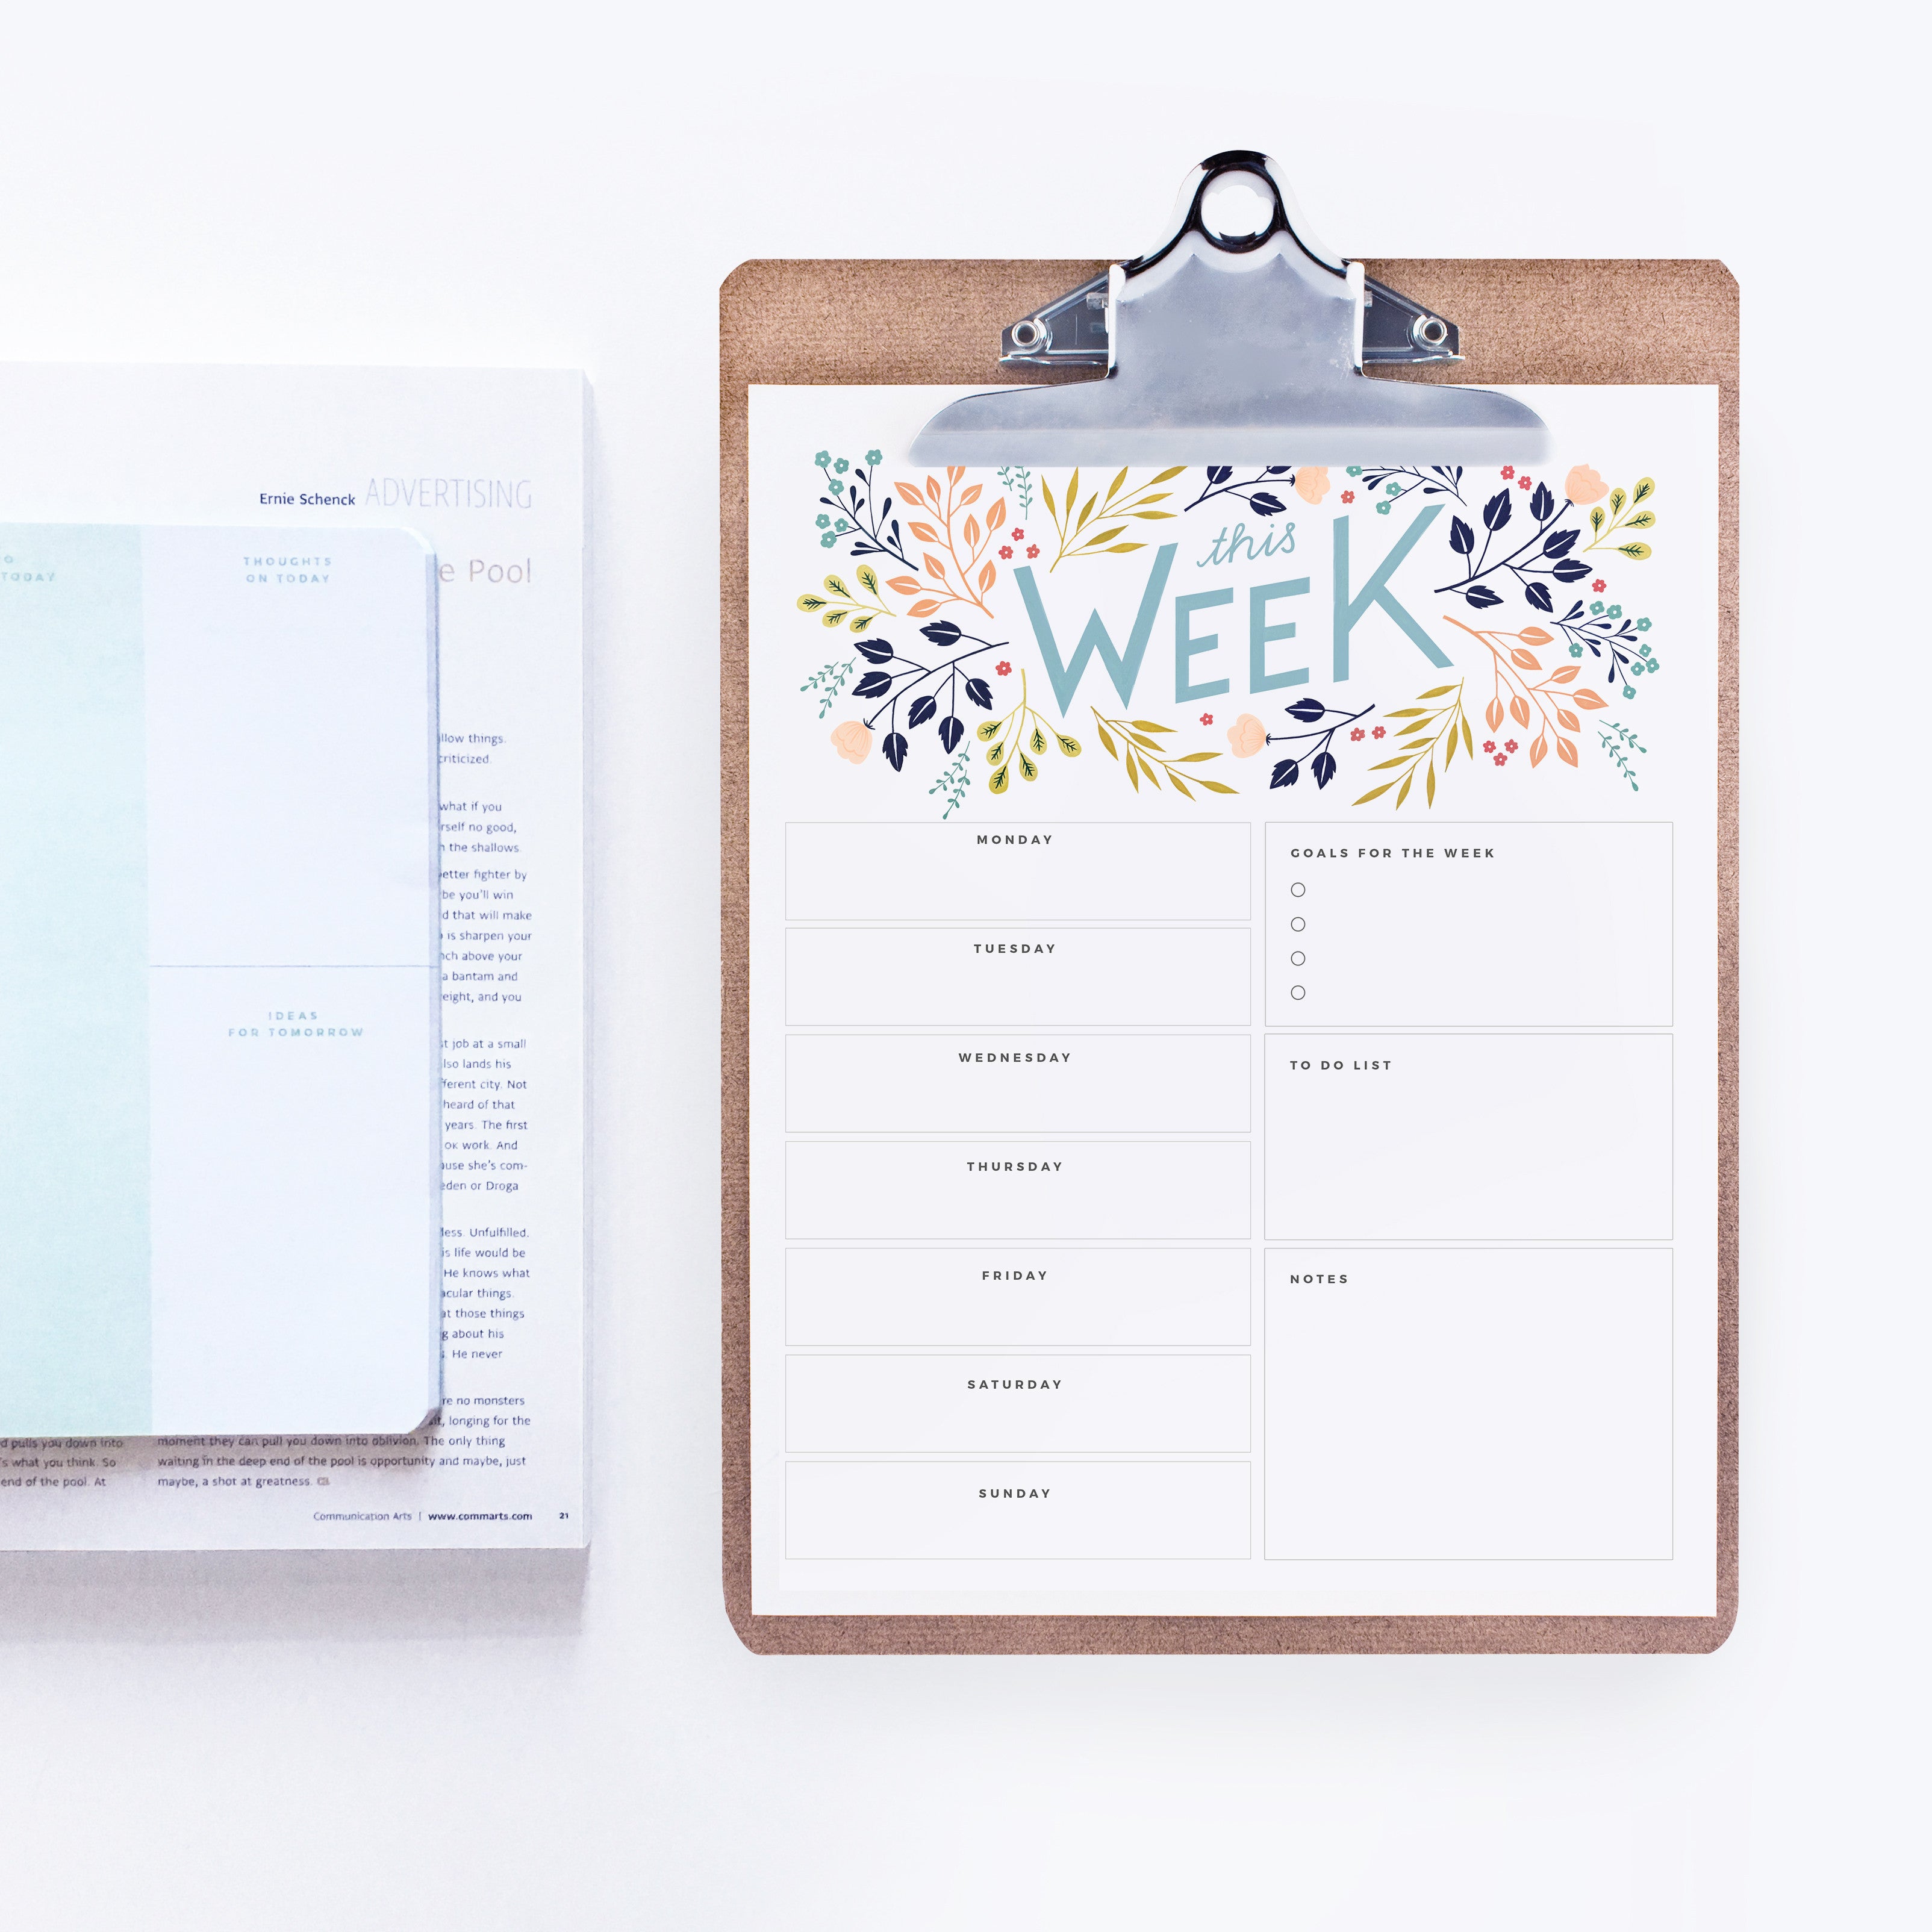 This Week - Planner Printable - Archer and Olive